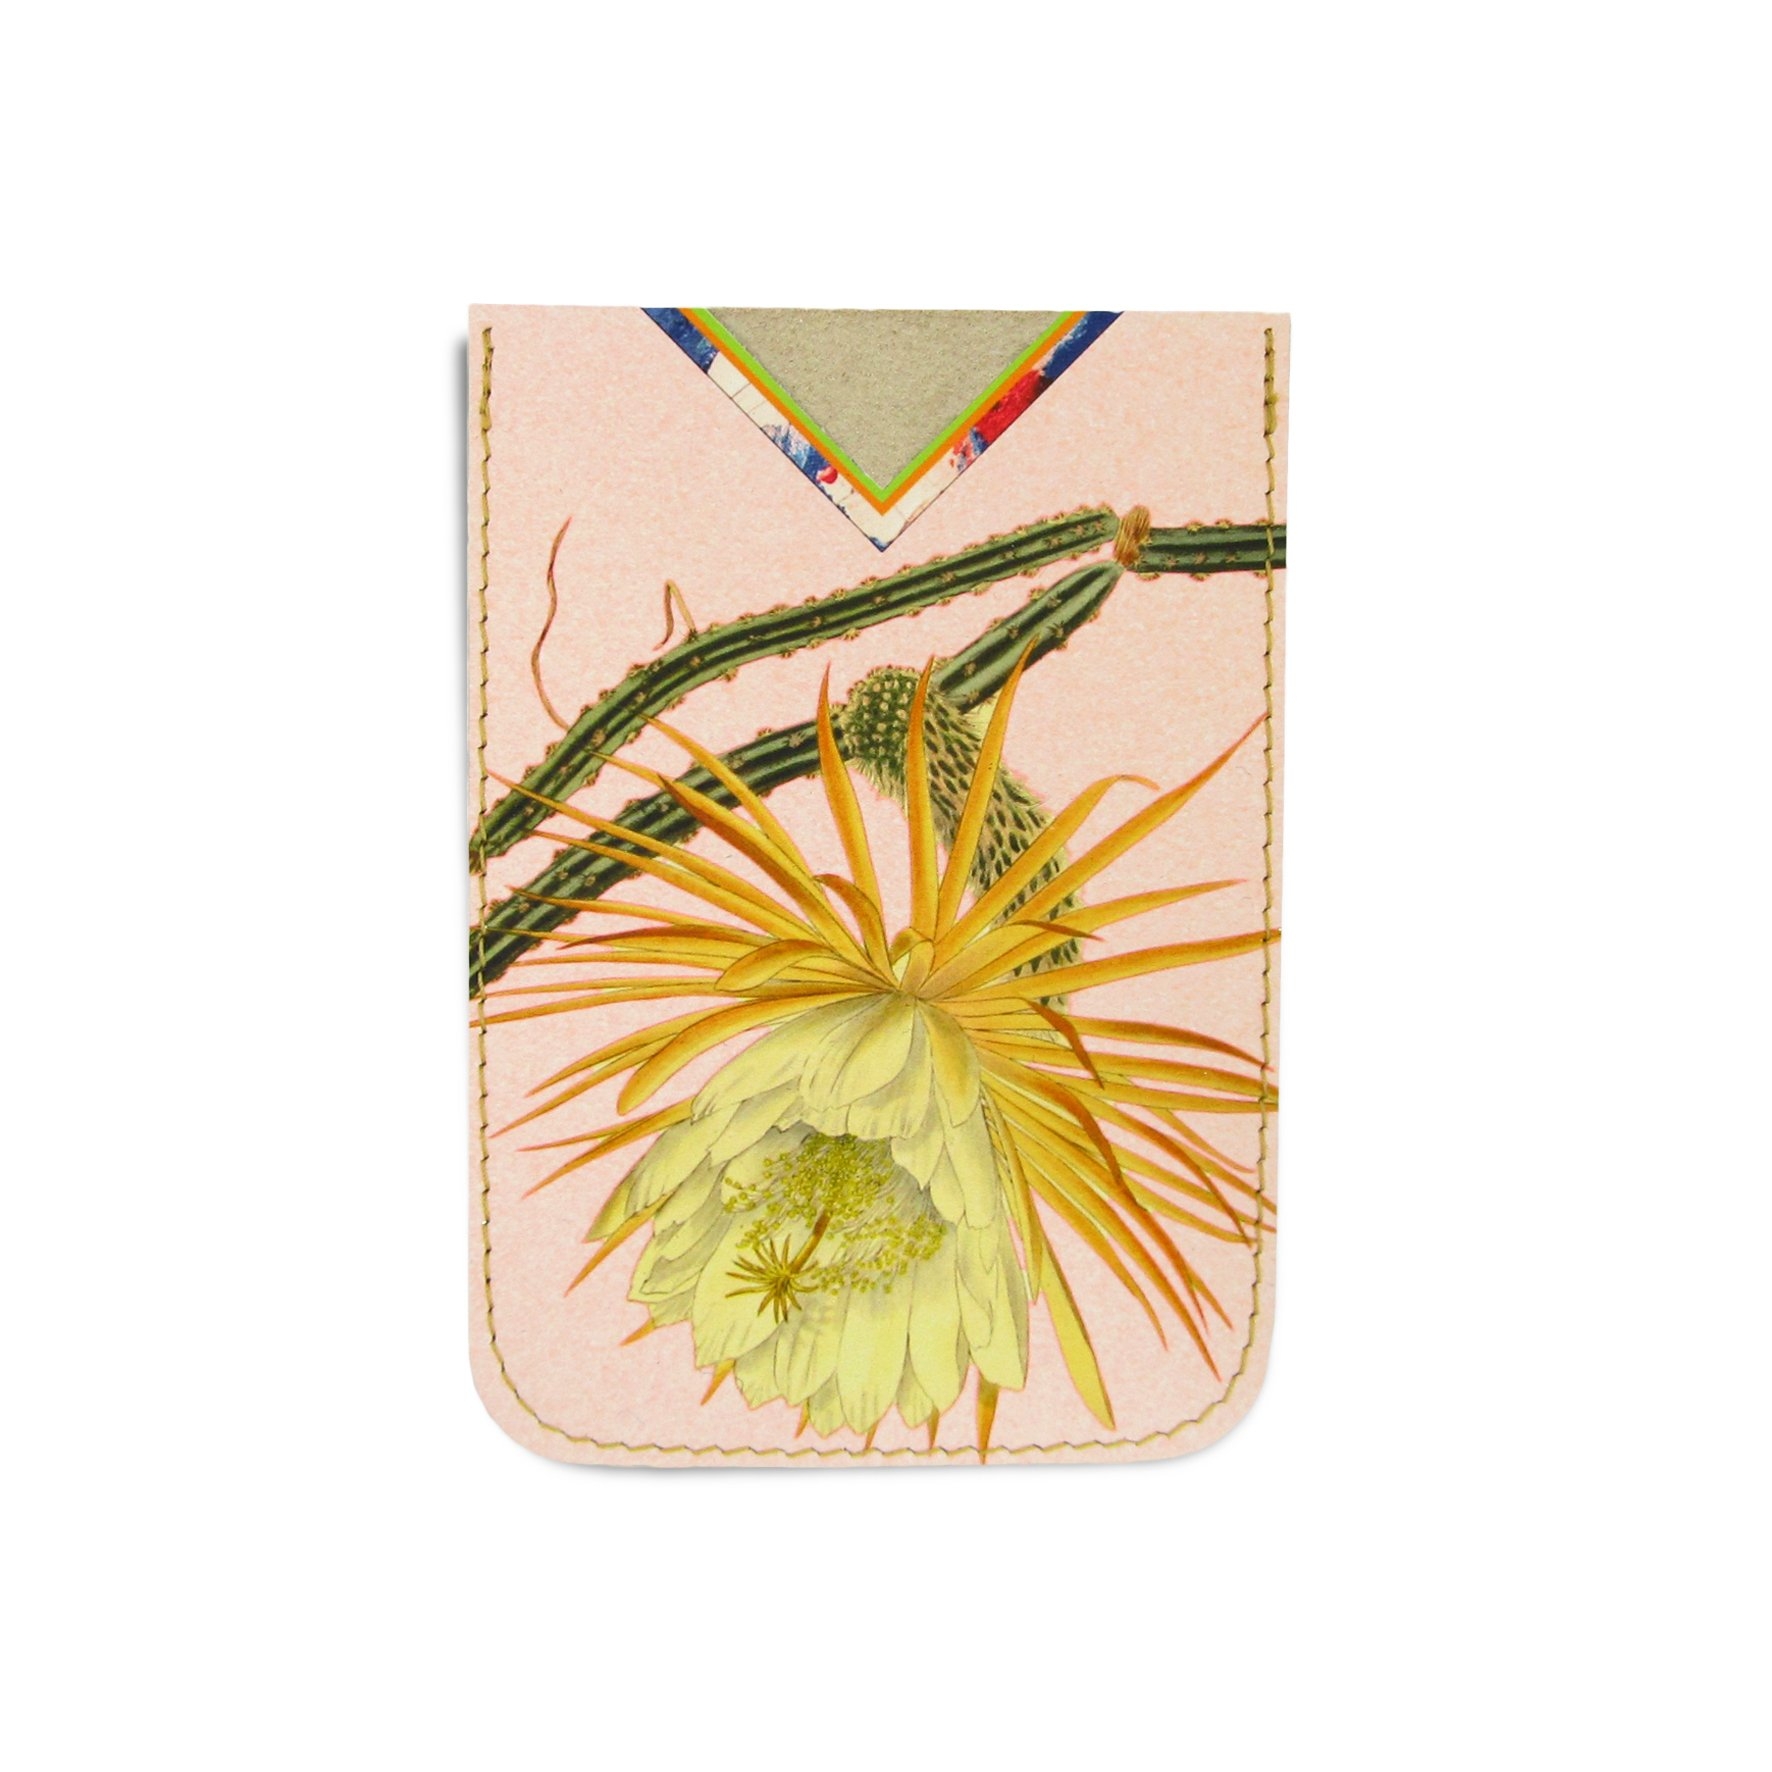 Leather Card Holder / Phone Sticker Wallet Pocket – Cactus Flower – Standard Card Holder / Without personalisation / Peach